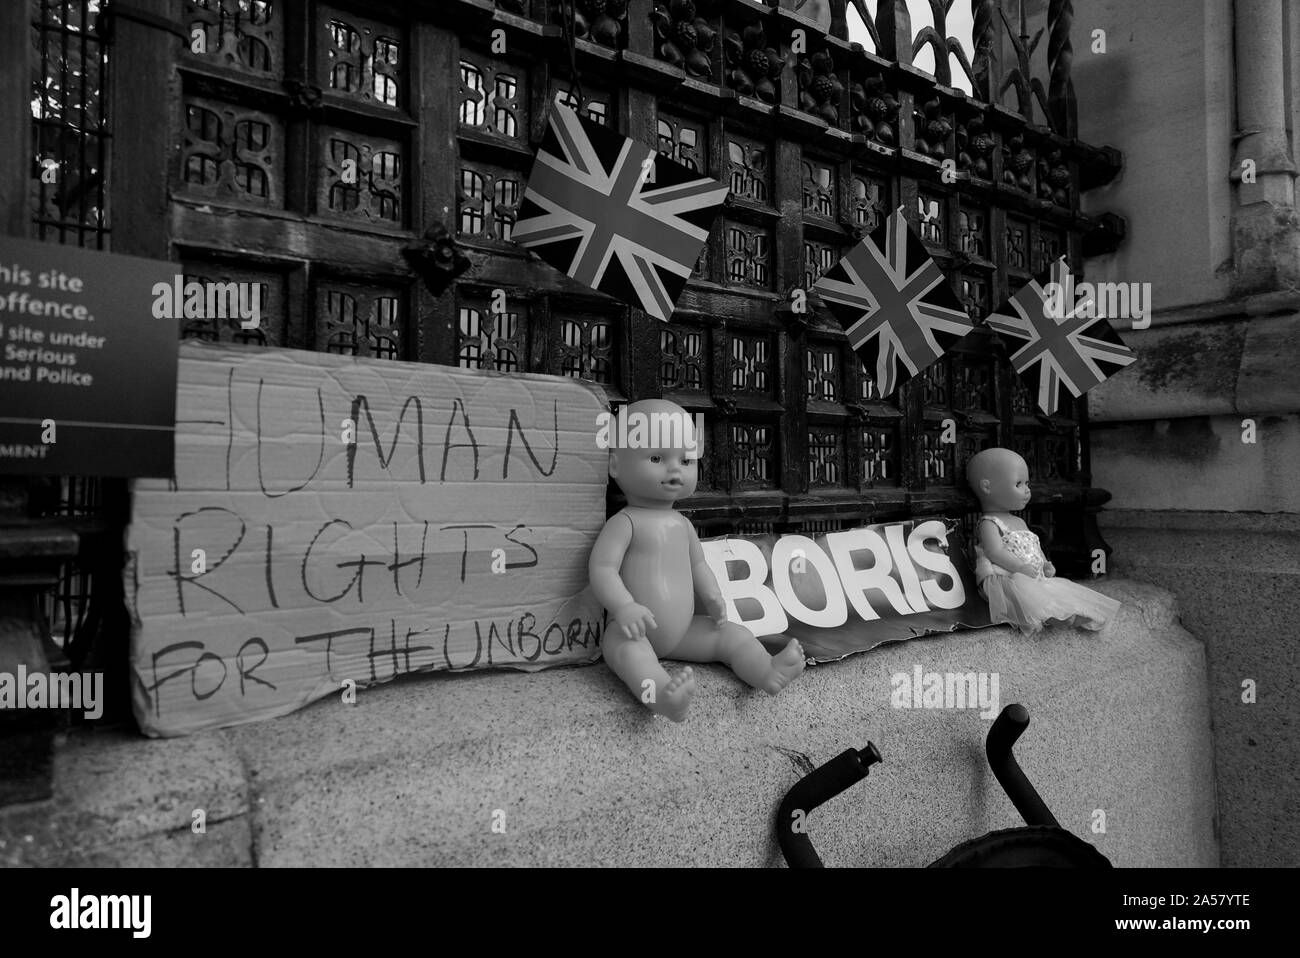 Anti-abortion stand in London. Pro-life protestor. Stock Photo